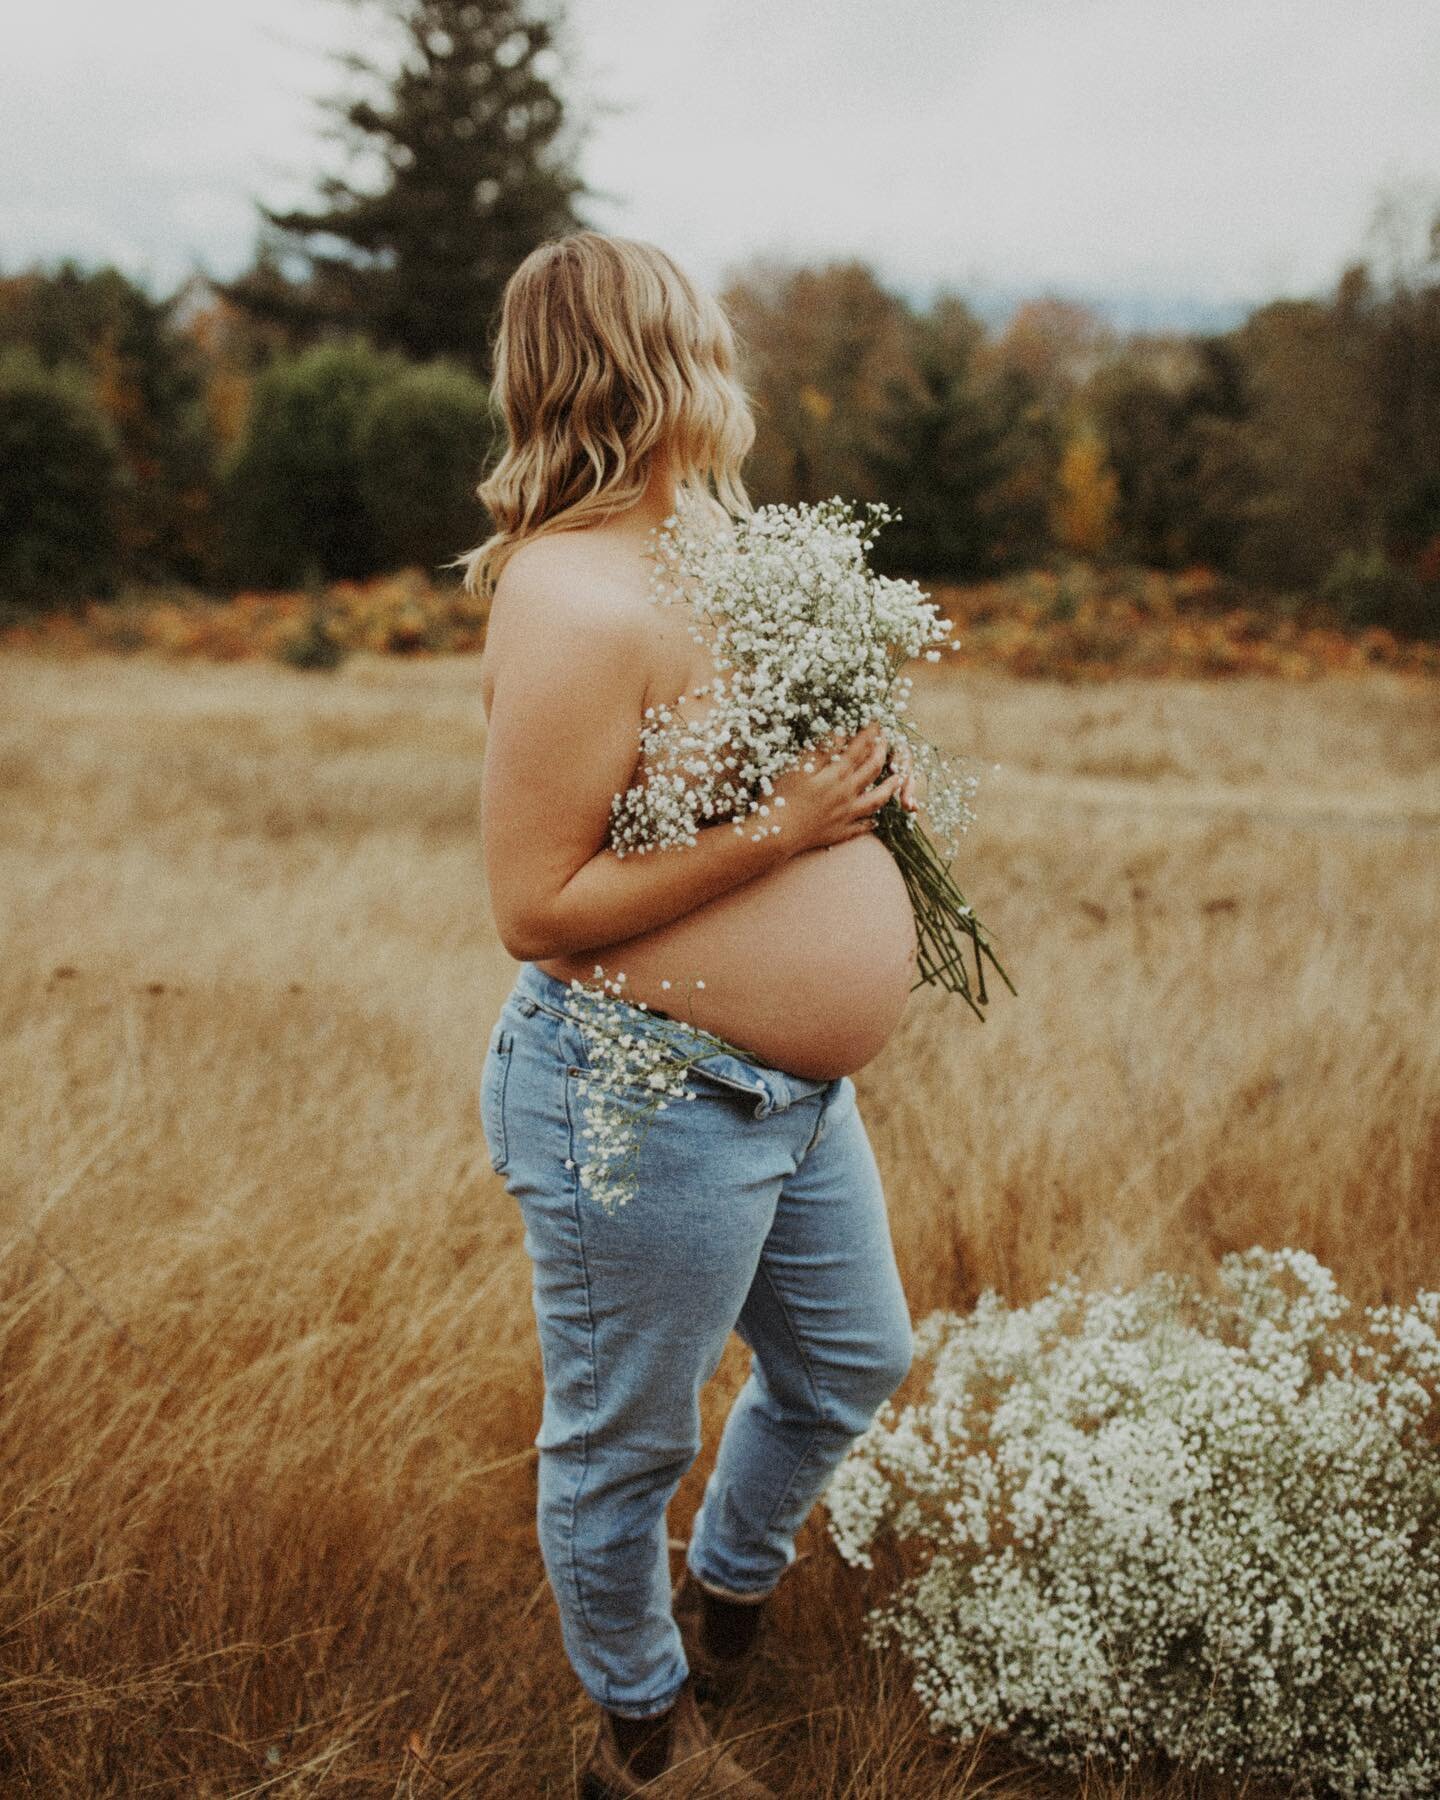 I remember taking photos in this field with my friends all the time when I first started my photography journey in middle/high school. It&rsquo;s pretty wild to now by photographing their maternity sessions here. 

Yesterday brought back a lot of mem